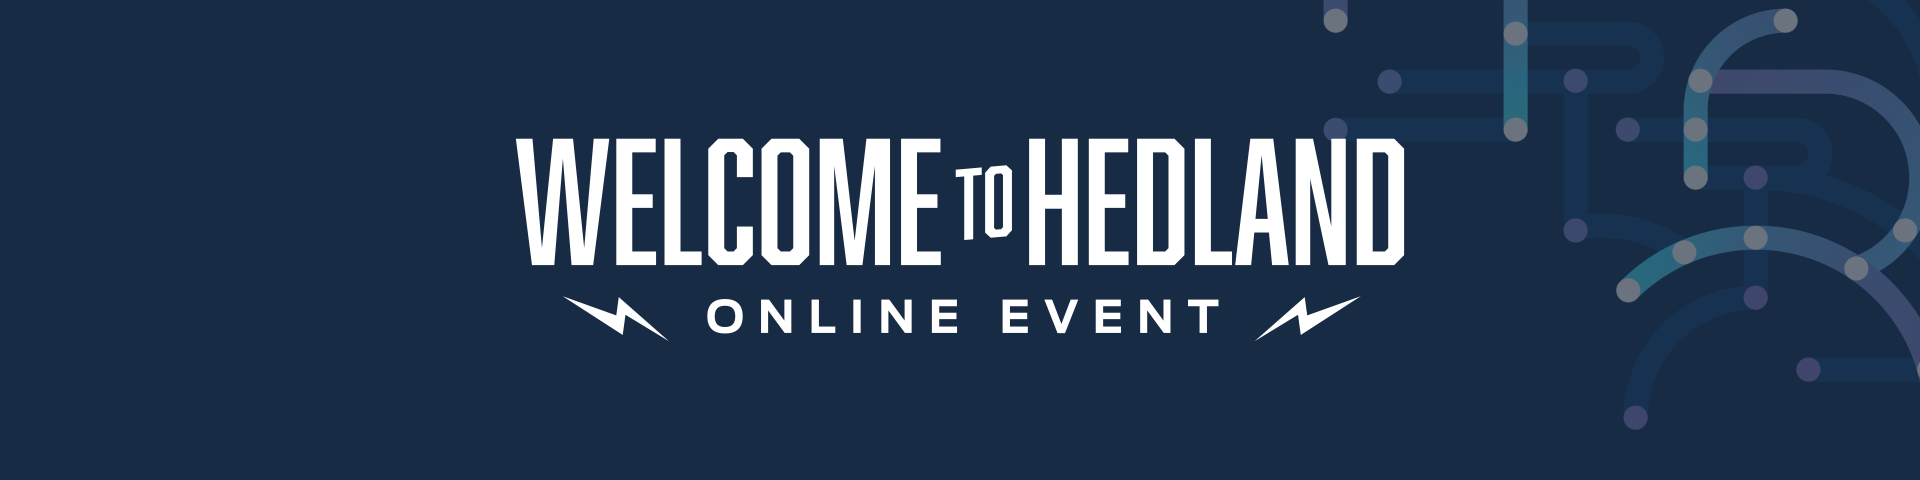 Welcome to Hedland Online platform launches